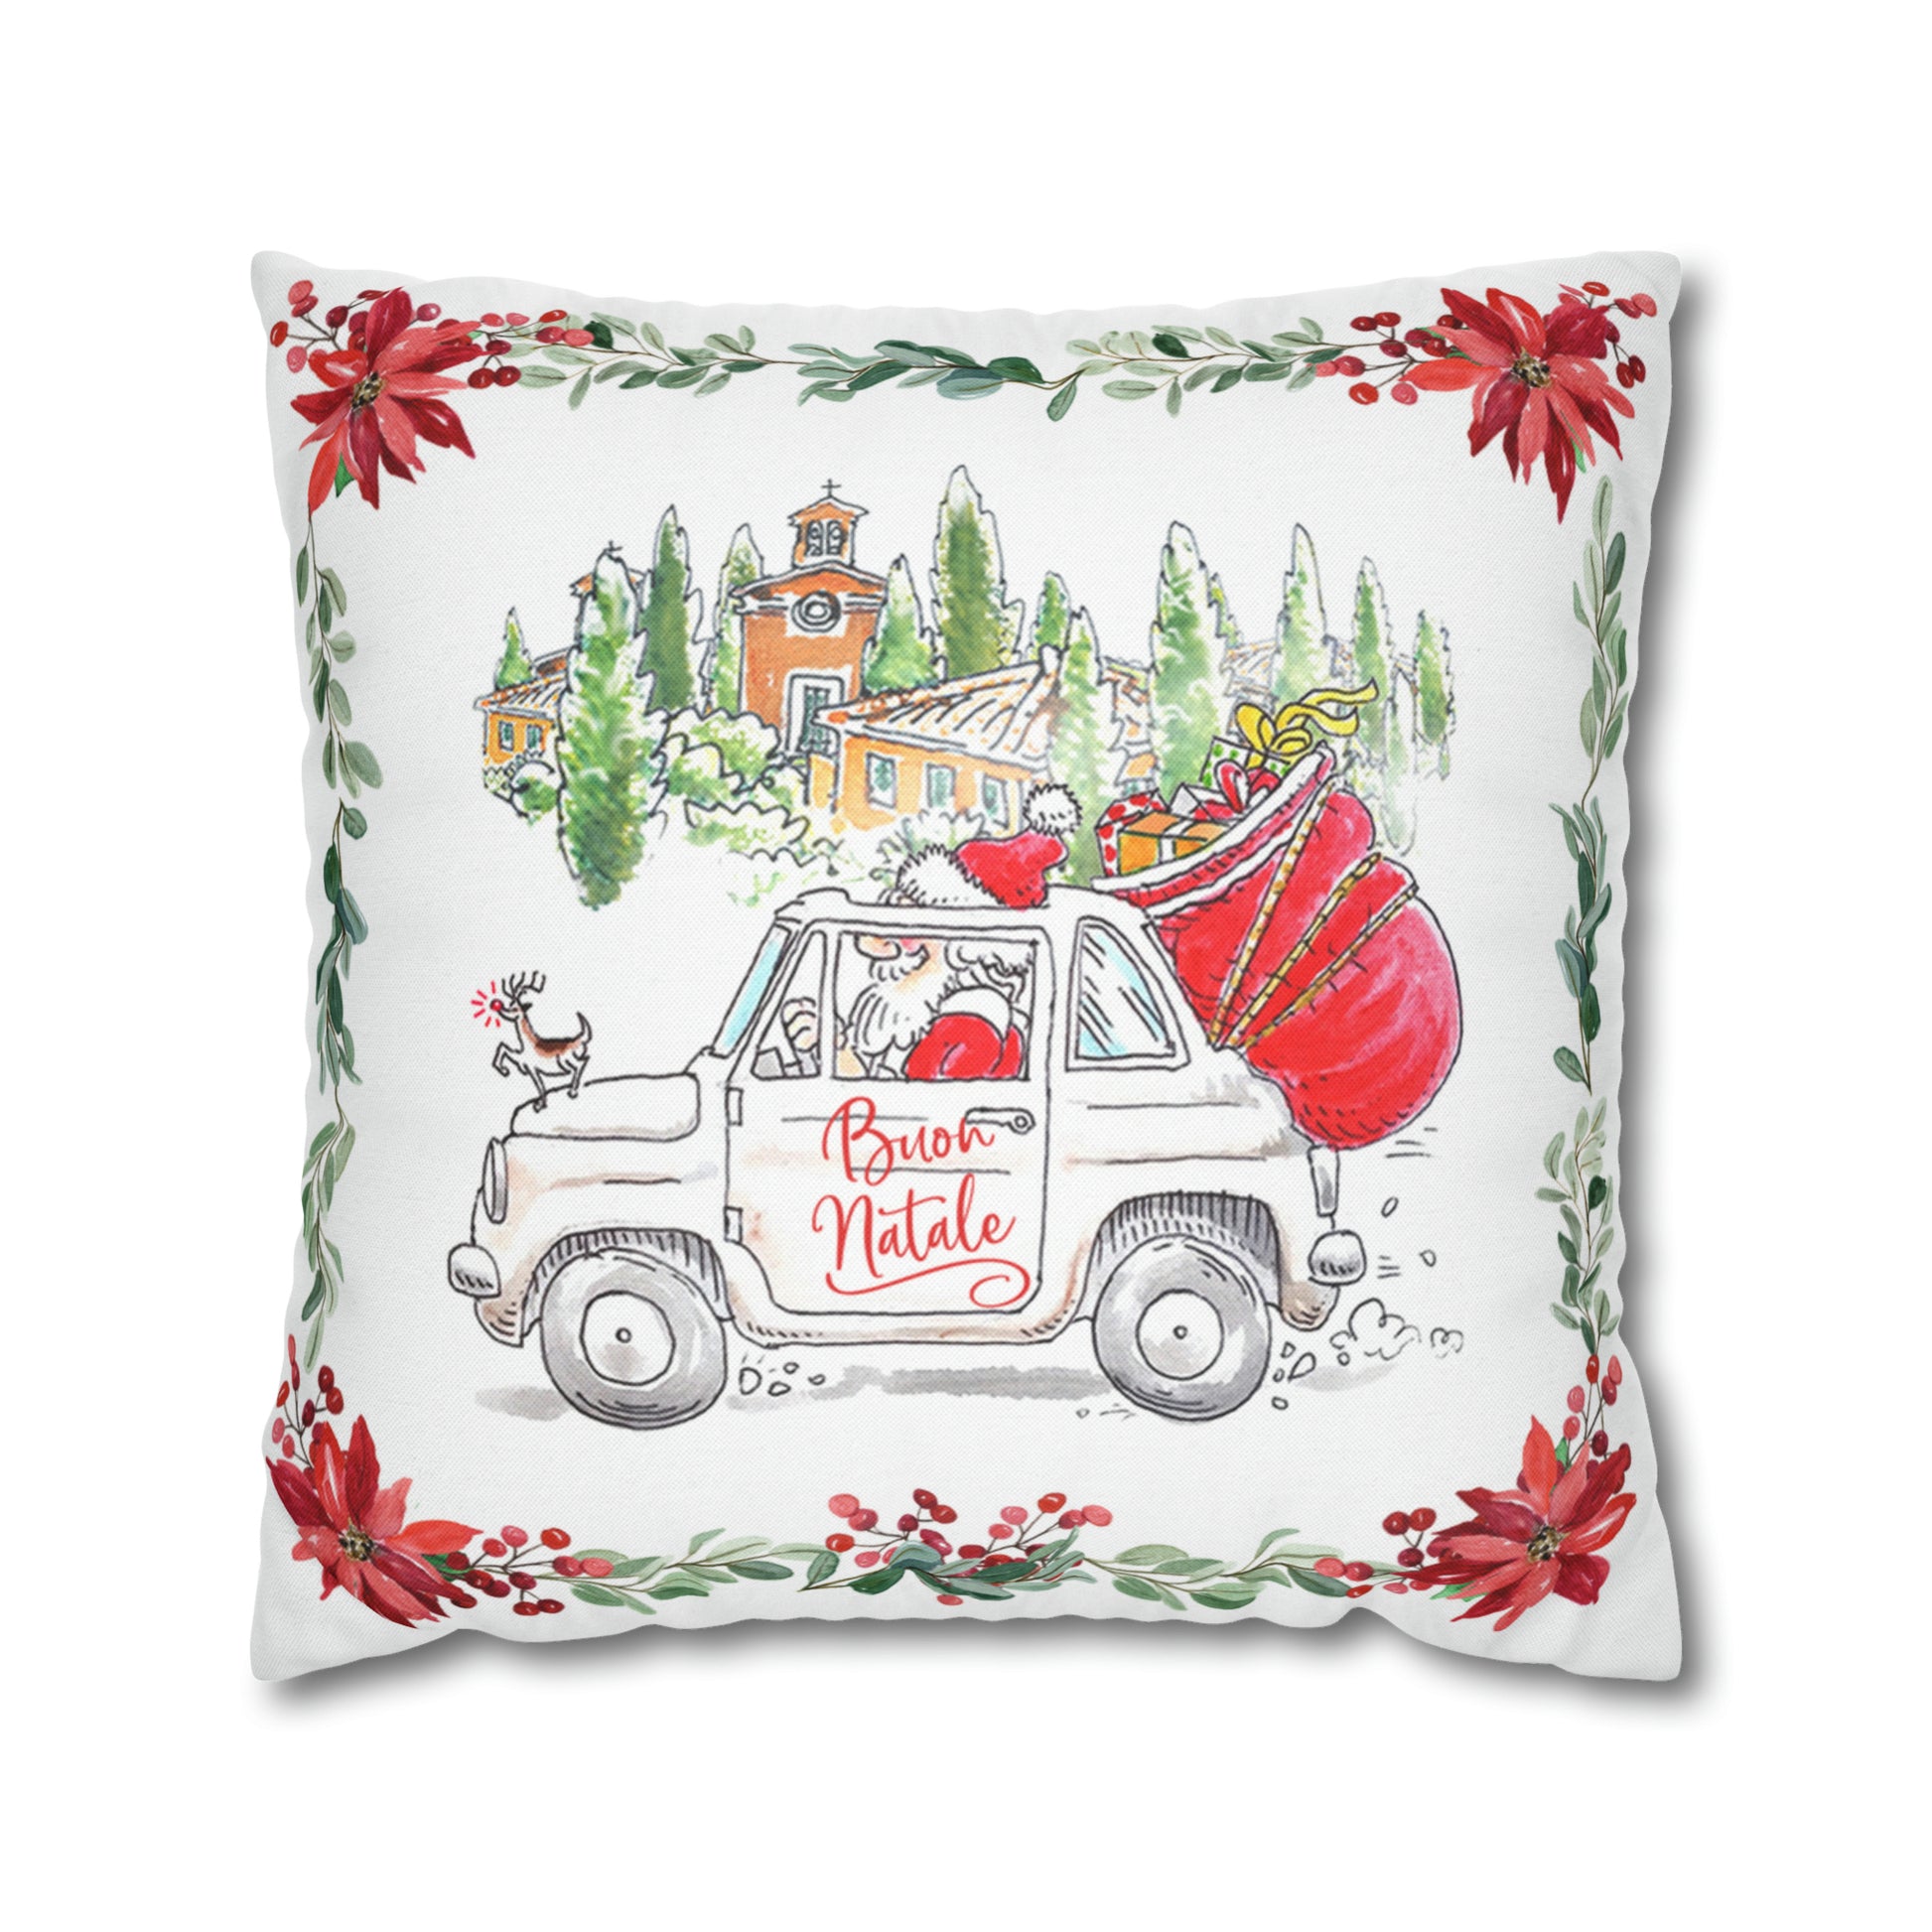 Festive Italy-themed pillow-case and of Babbo Natale driving his vintage Fiat 500 through the Italian countryside!  Designed by Italian Summers